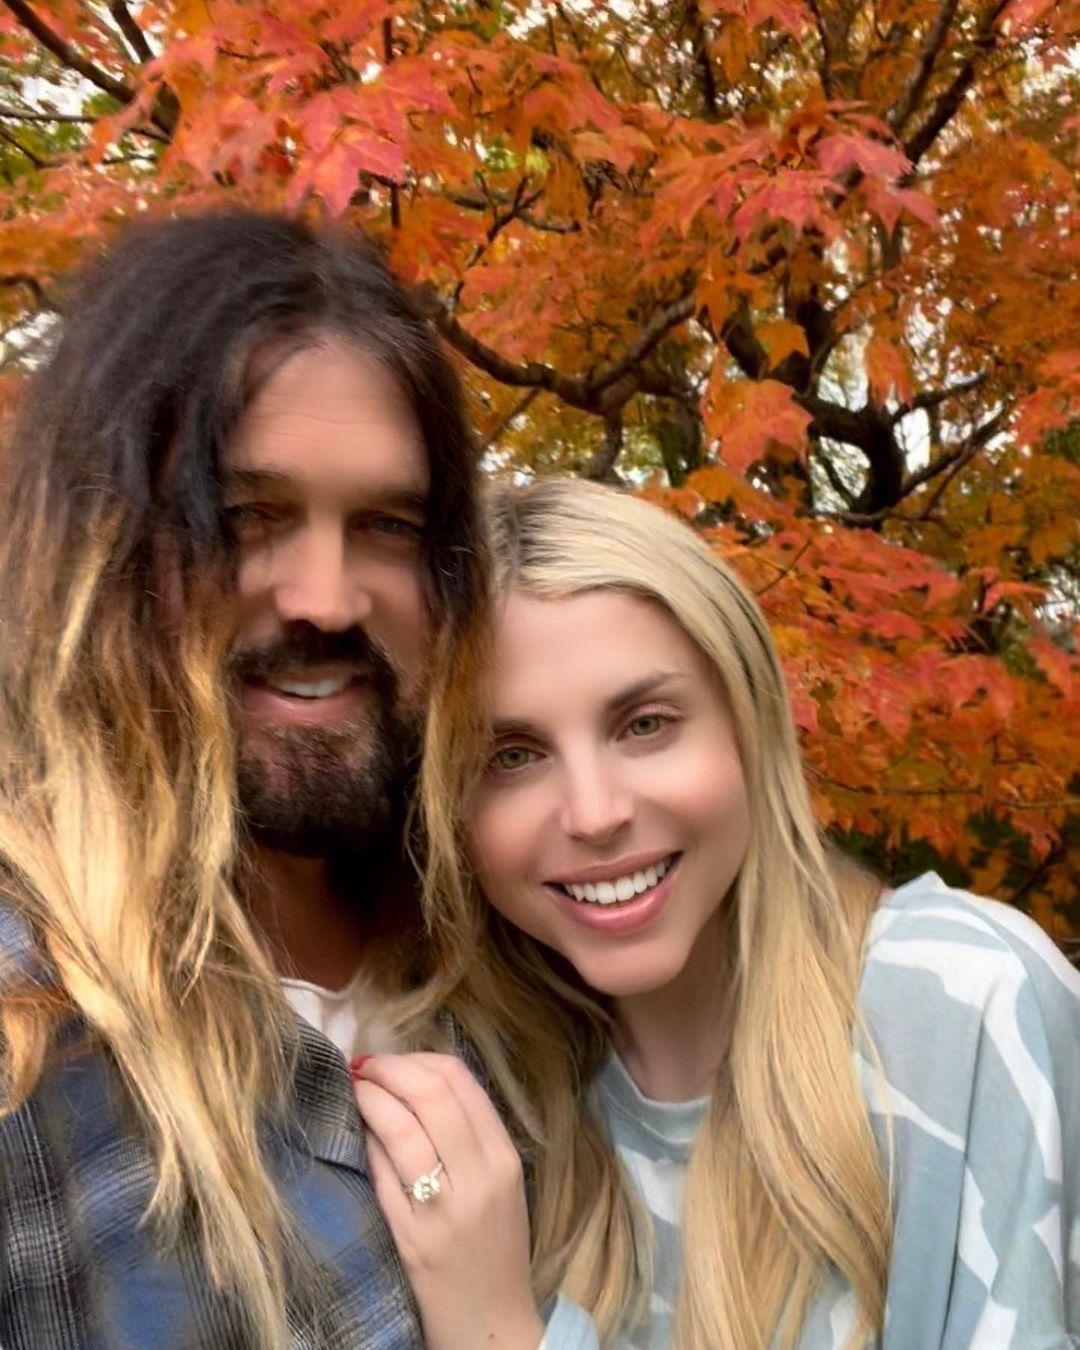 Billy Ray Cyrus confirms engagement to Firerose